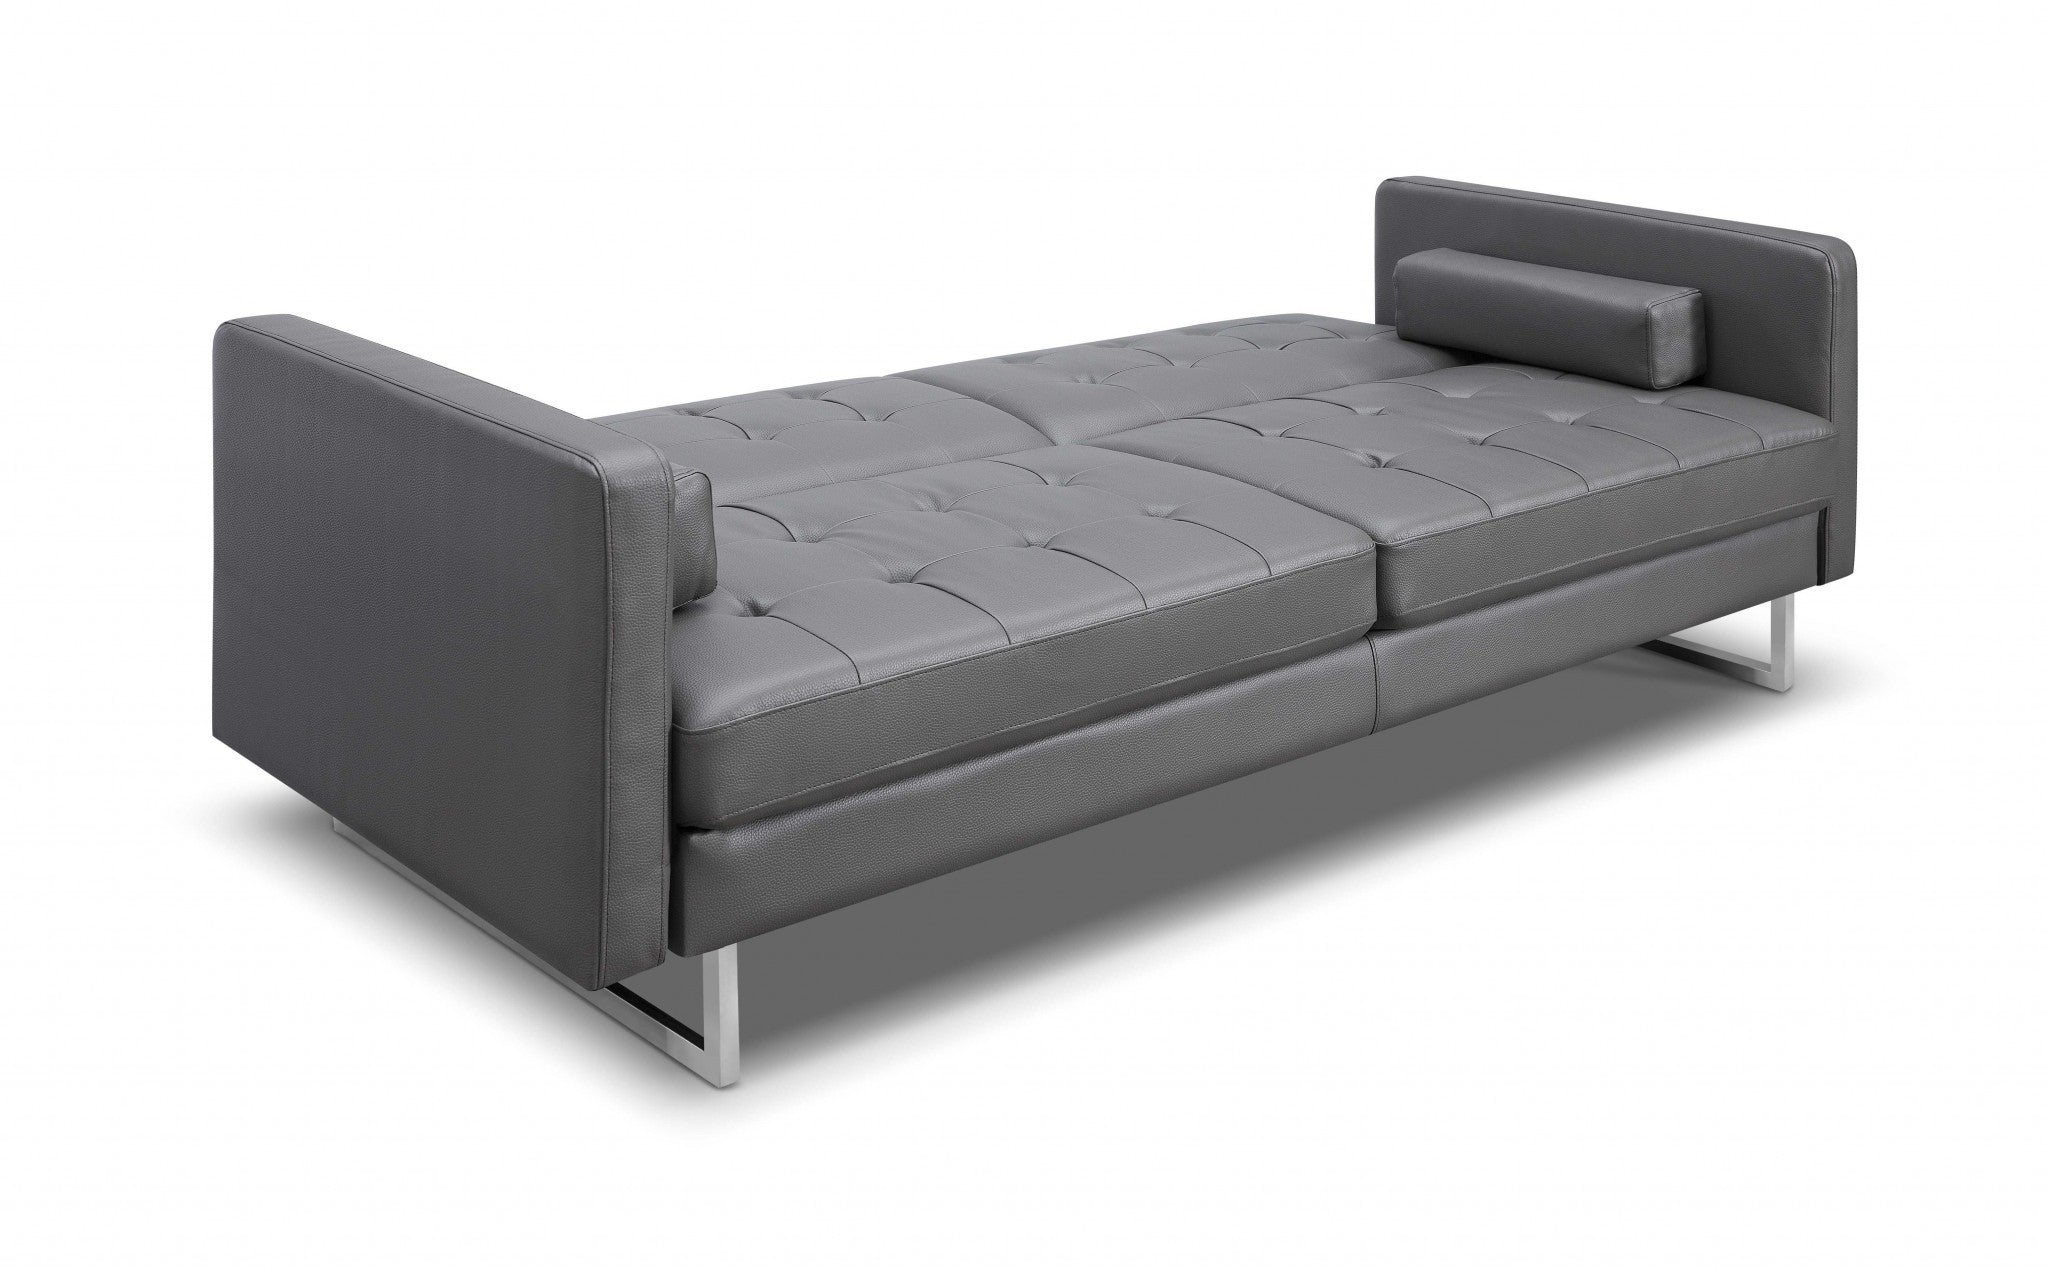 80" Gray Faux Leather Sofa With Silver Legs